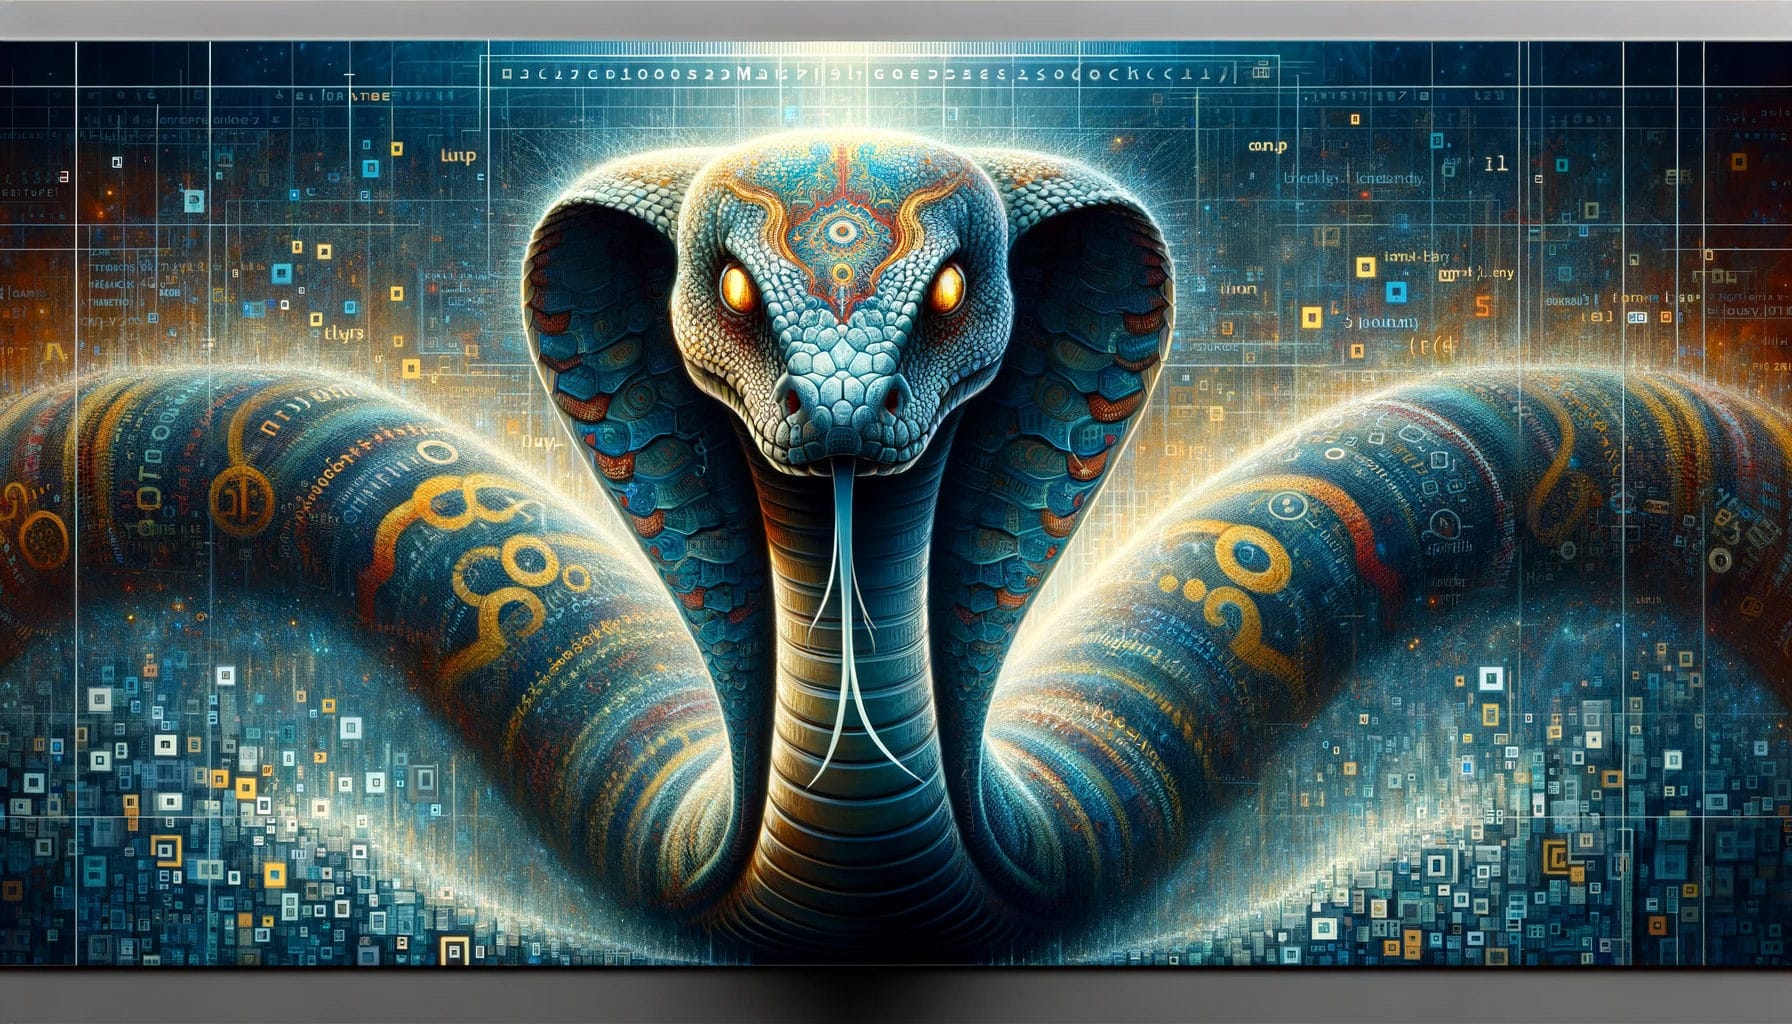 A snake with a Python logo emerges from a digital landscape, representing the depth of recursive programming concepts.